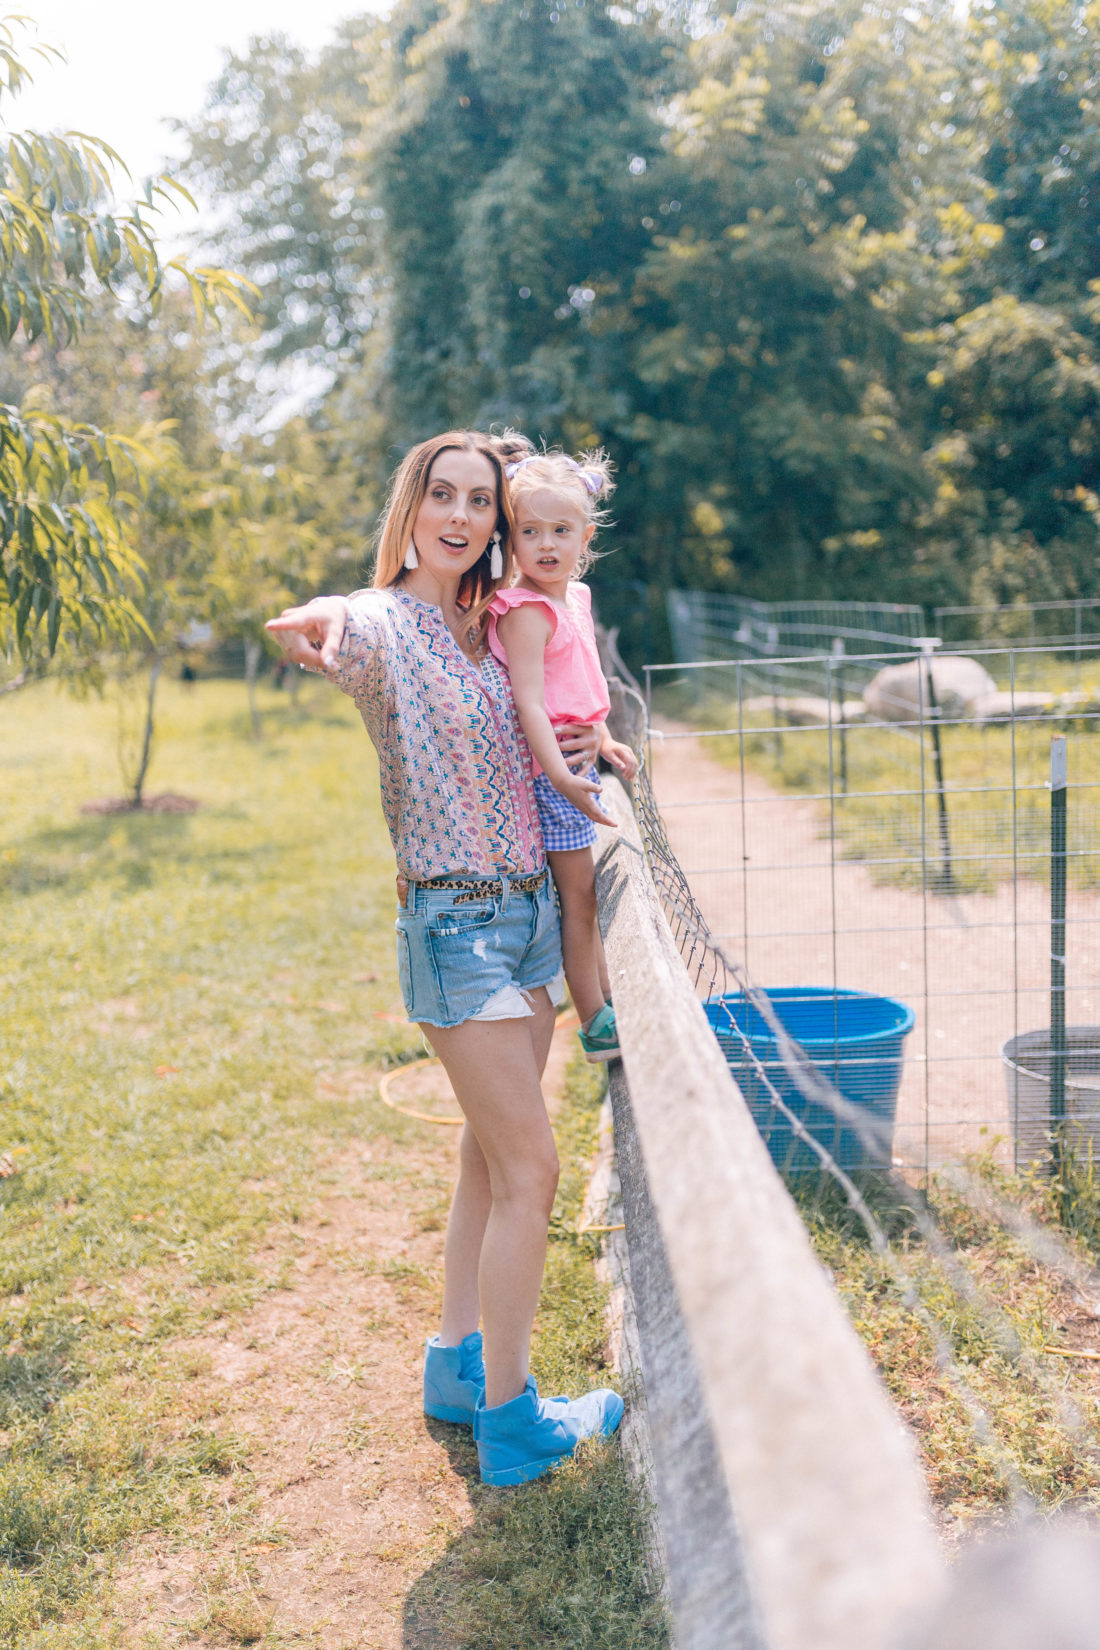 Eva Amurri Martino stands by a fence with four year old daughter Marlowe and peers in to an alpaca pen at a local connecticut farm